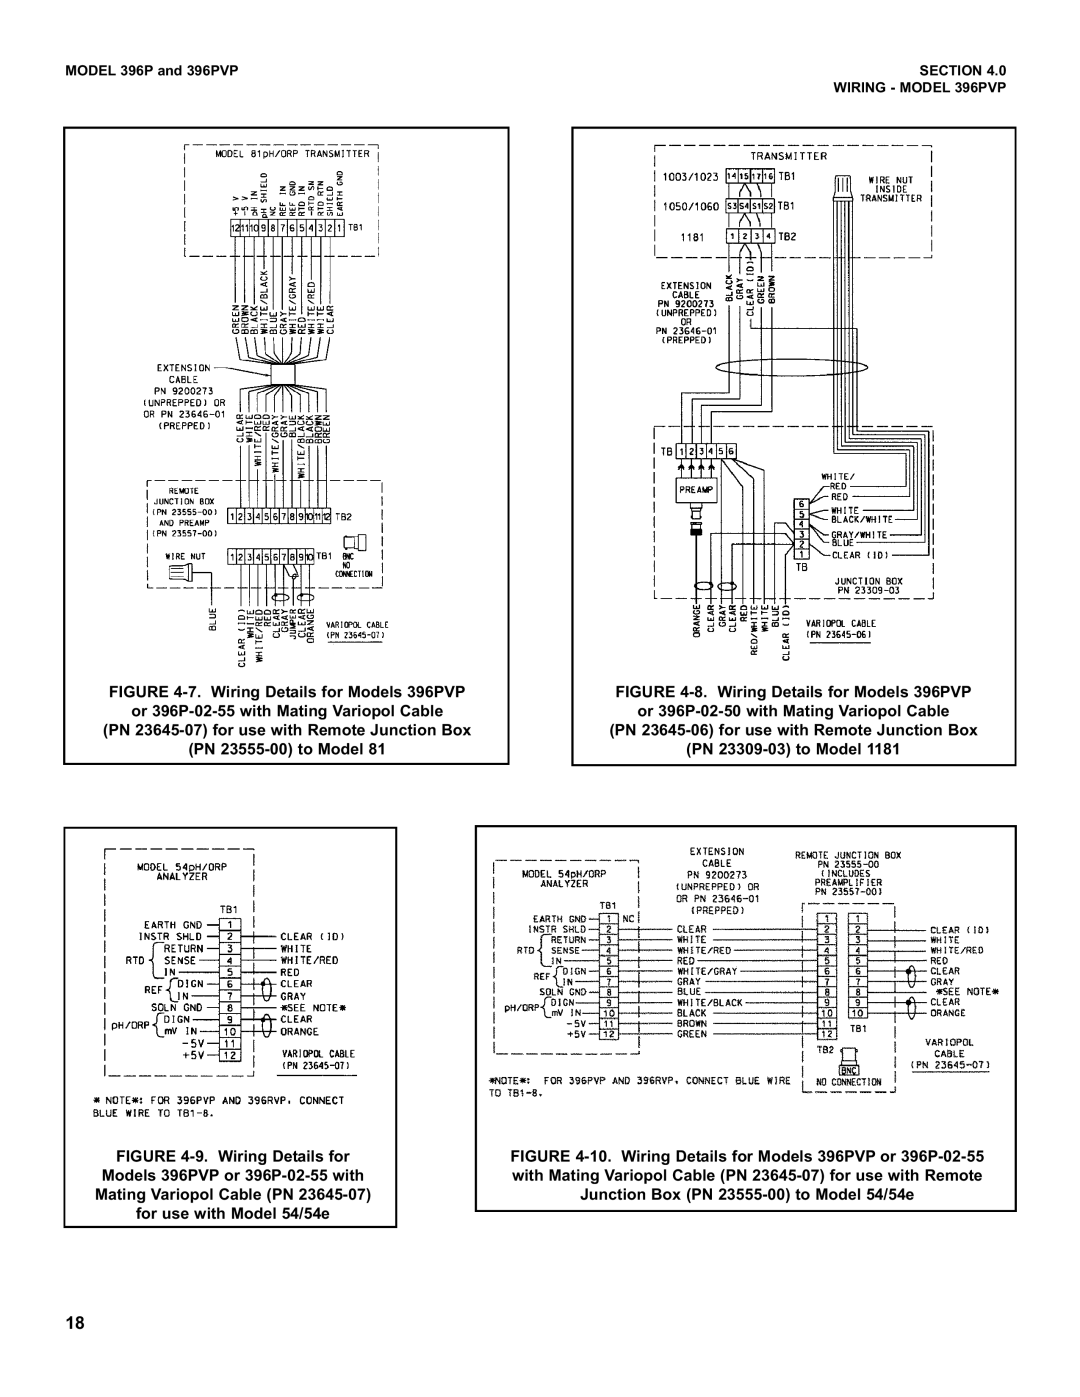 Emerson Process Management instruction manual 7.Wiring Details for Models 396PVP 